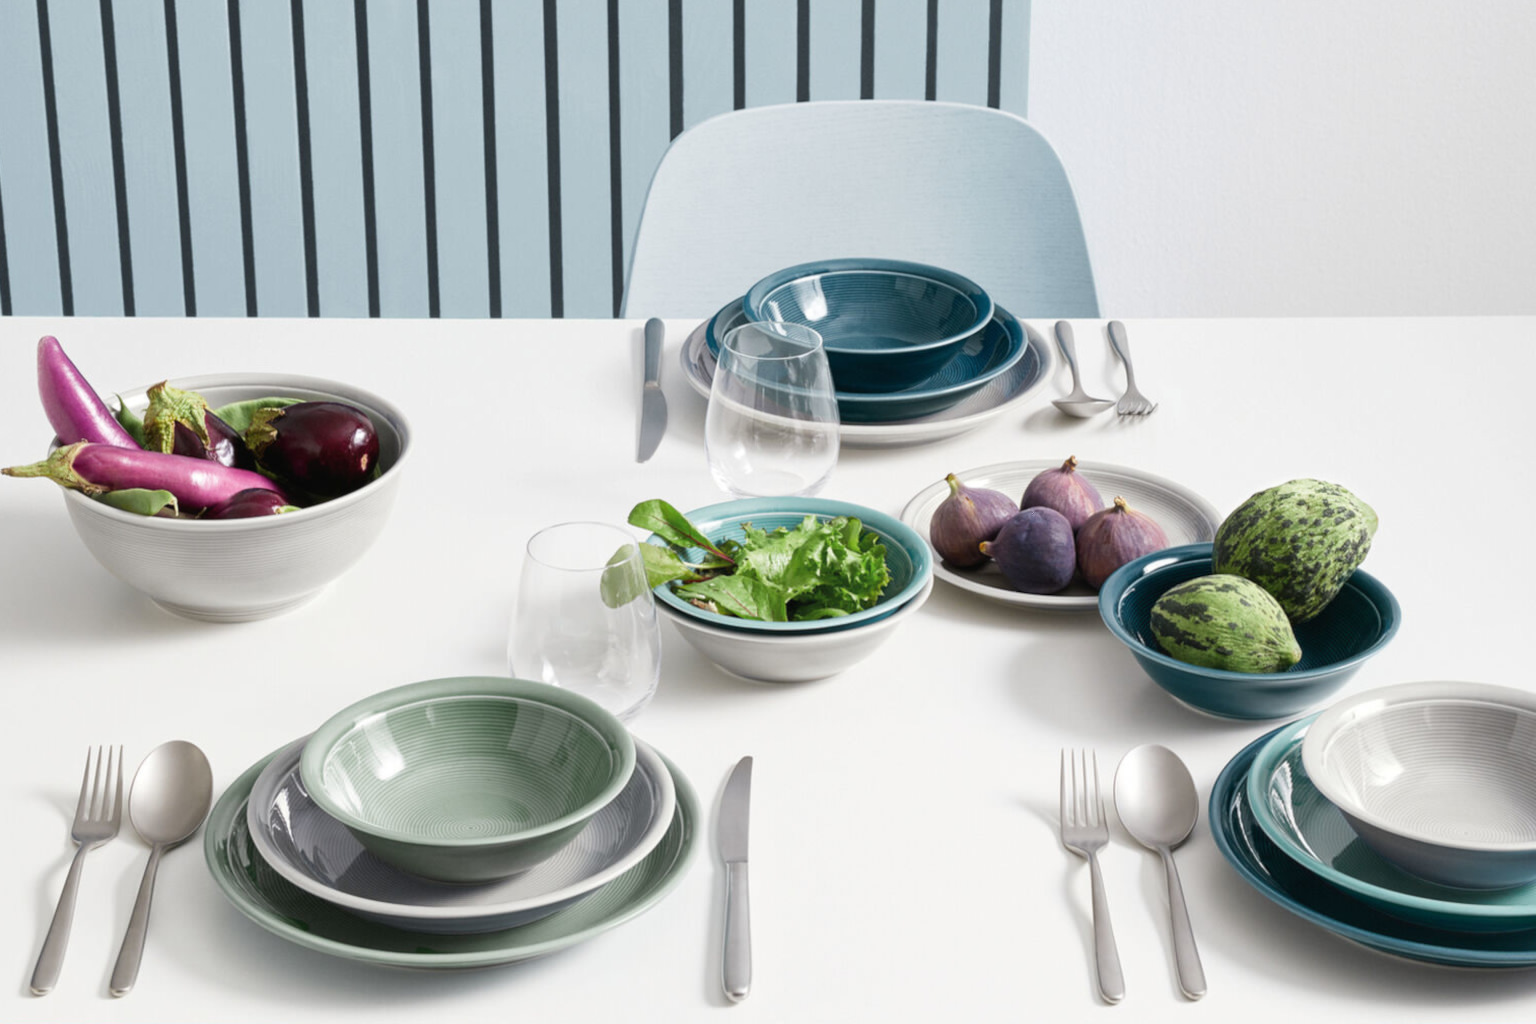 Table set with Thomas Trend Color items decorated with different vegetables